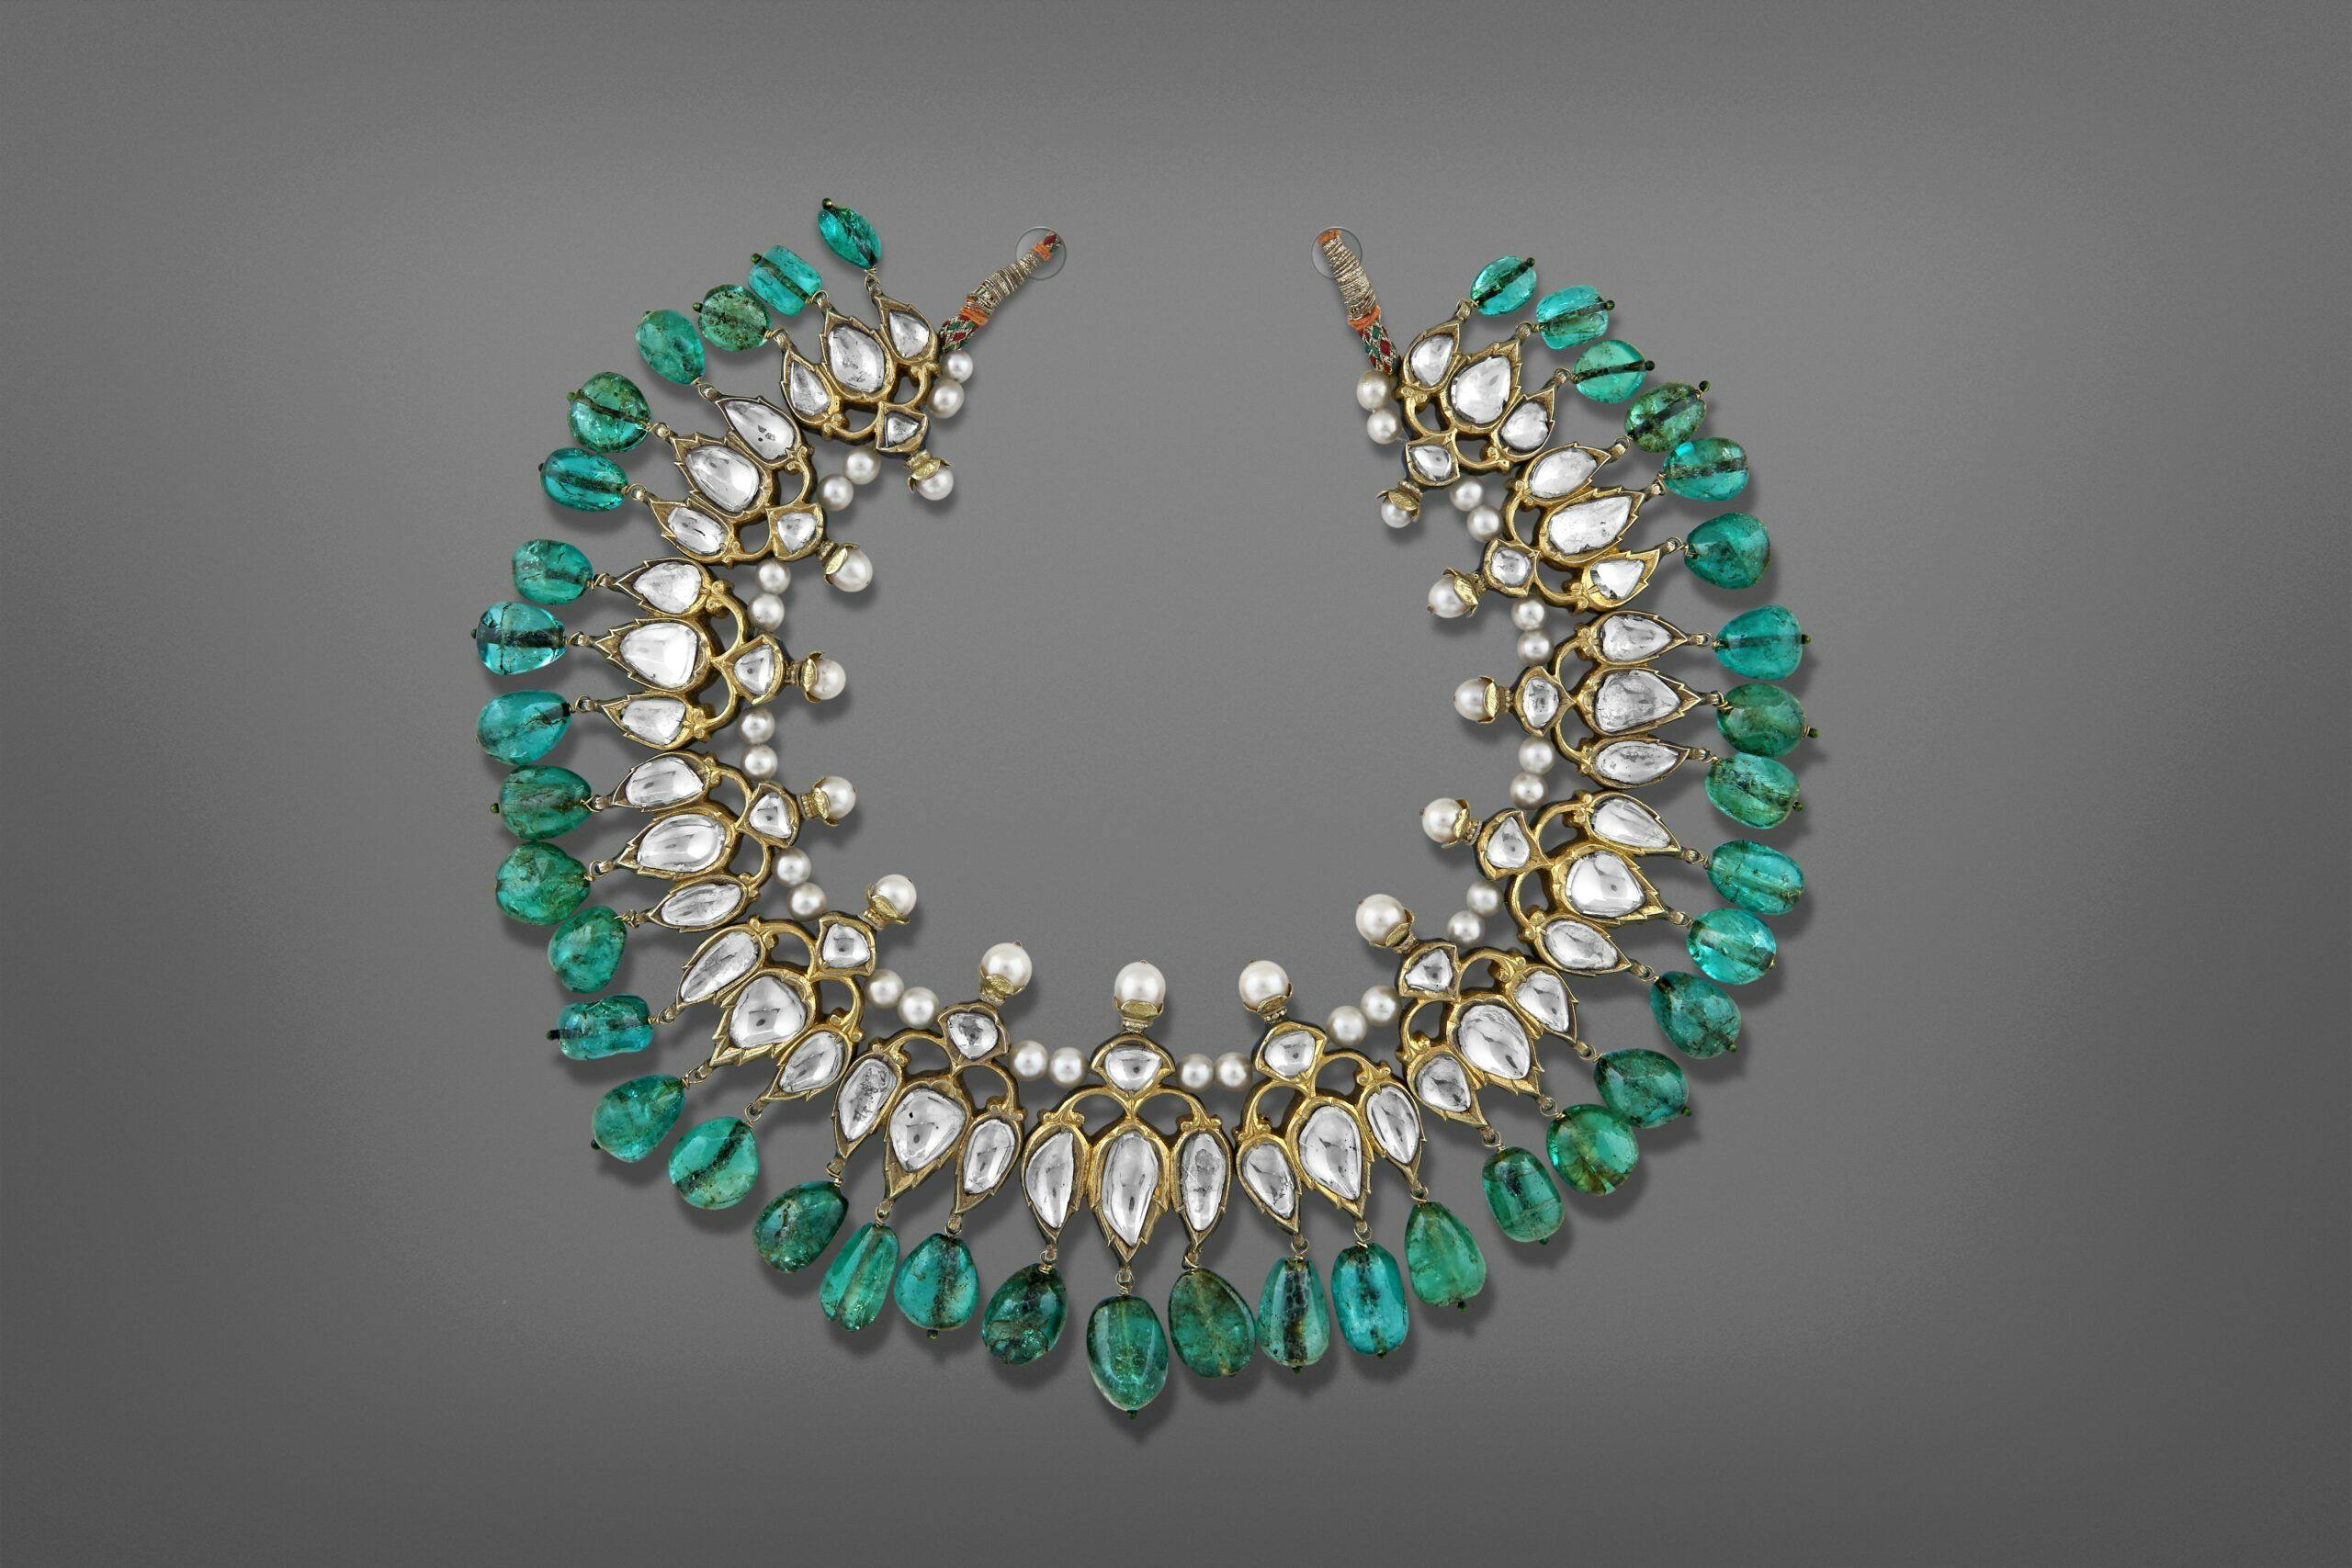 Champakali (necklace), Deccan, early 18th century